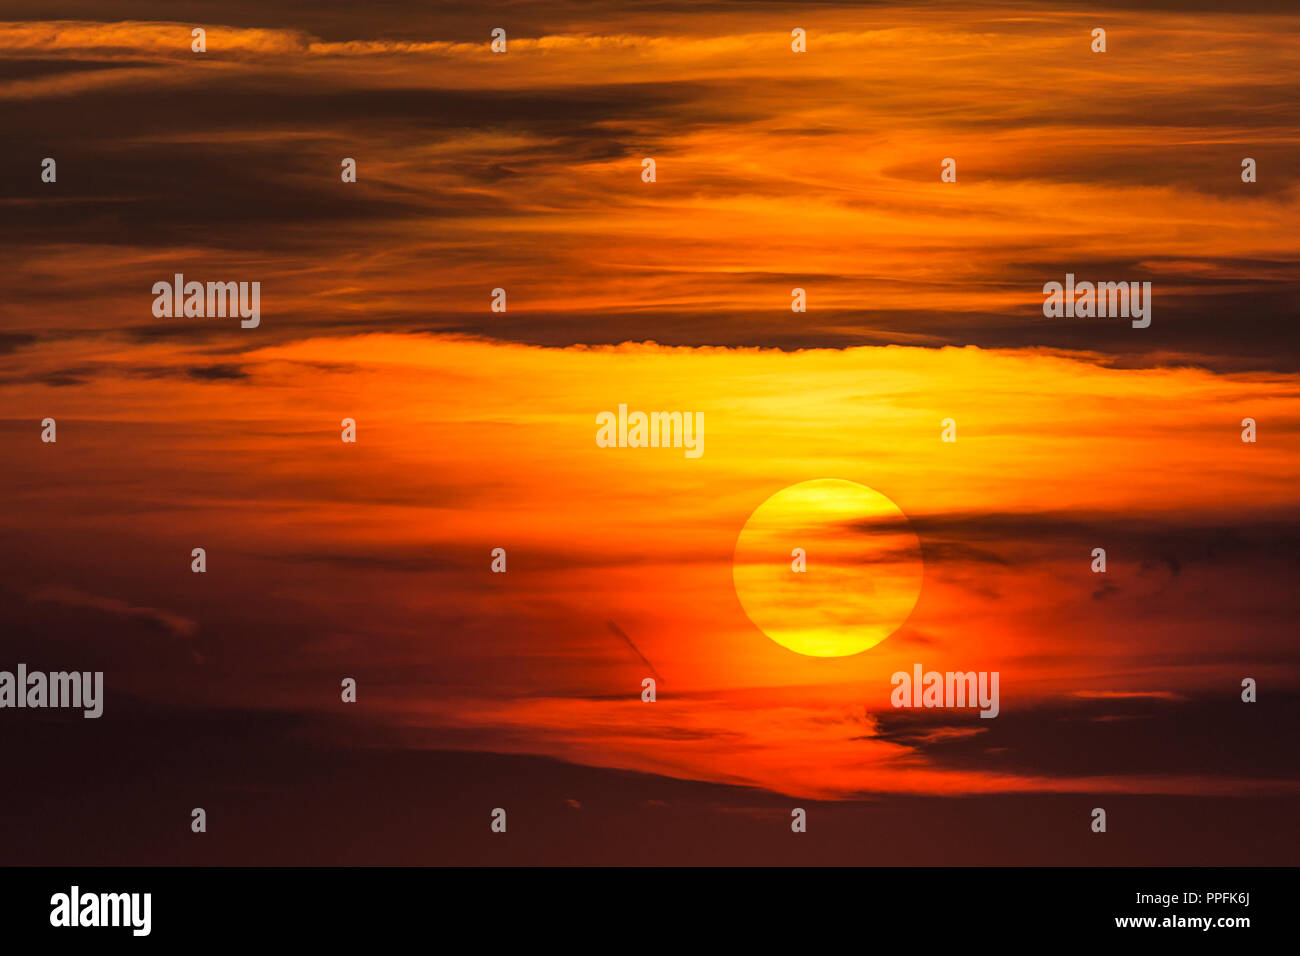 Glowing sun, sunset with clouds, evening sky, Germany Stock Photo